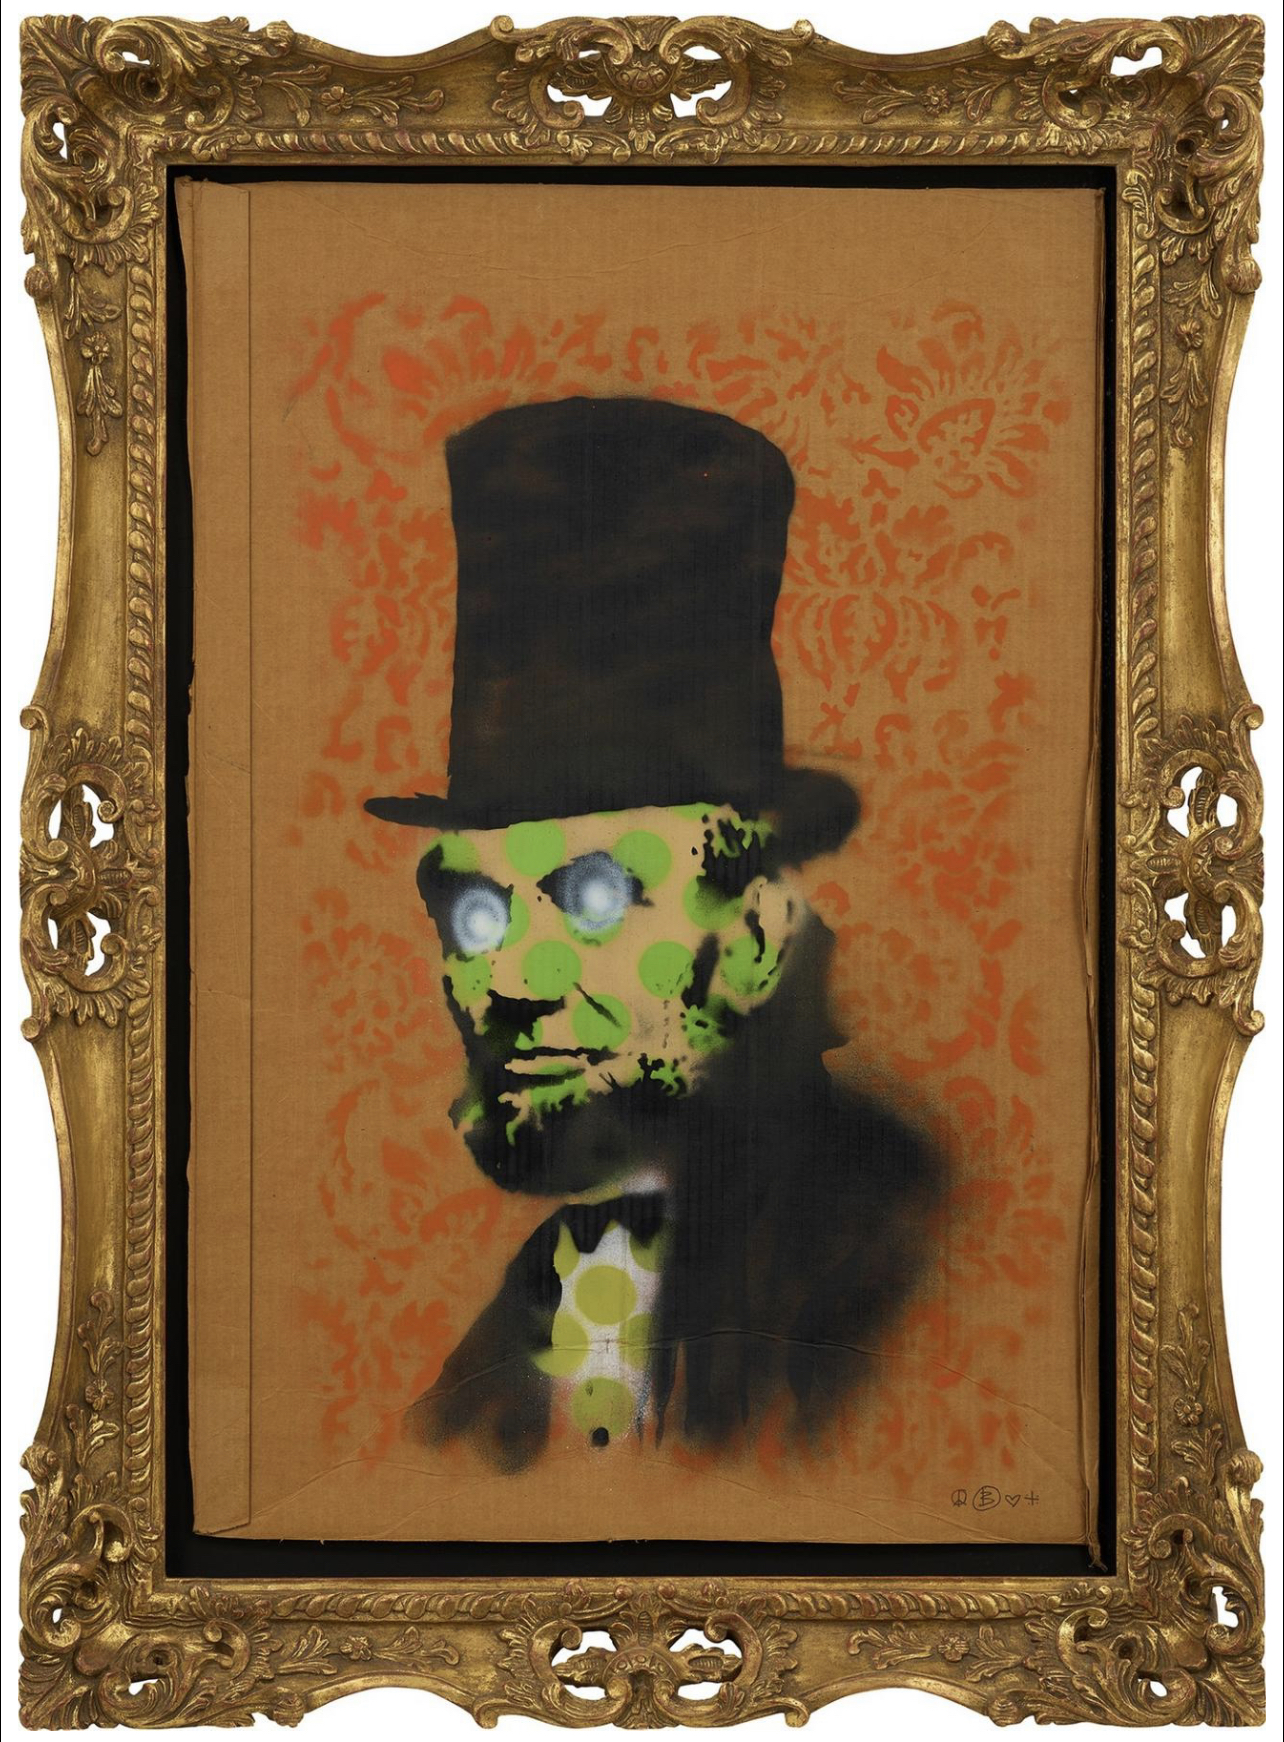 BANKSY (born 1974) Abe Lincoln - Offset Lithographic Poster produced by The Palace of Culture Sic... - Image 4 of 4